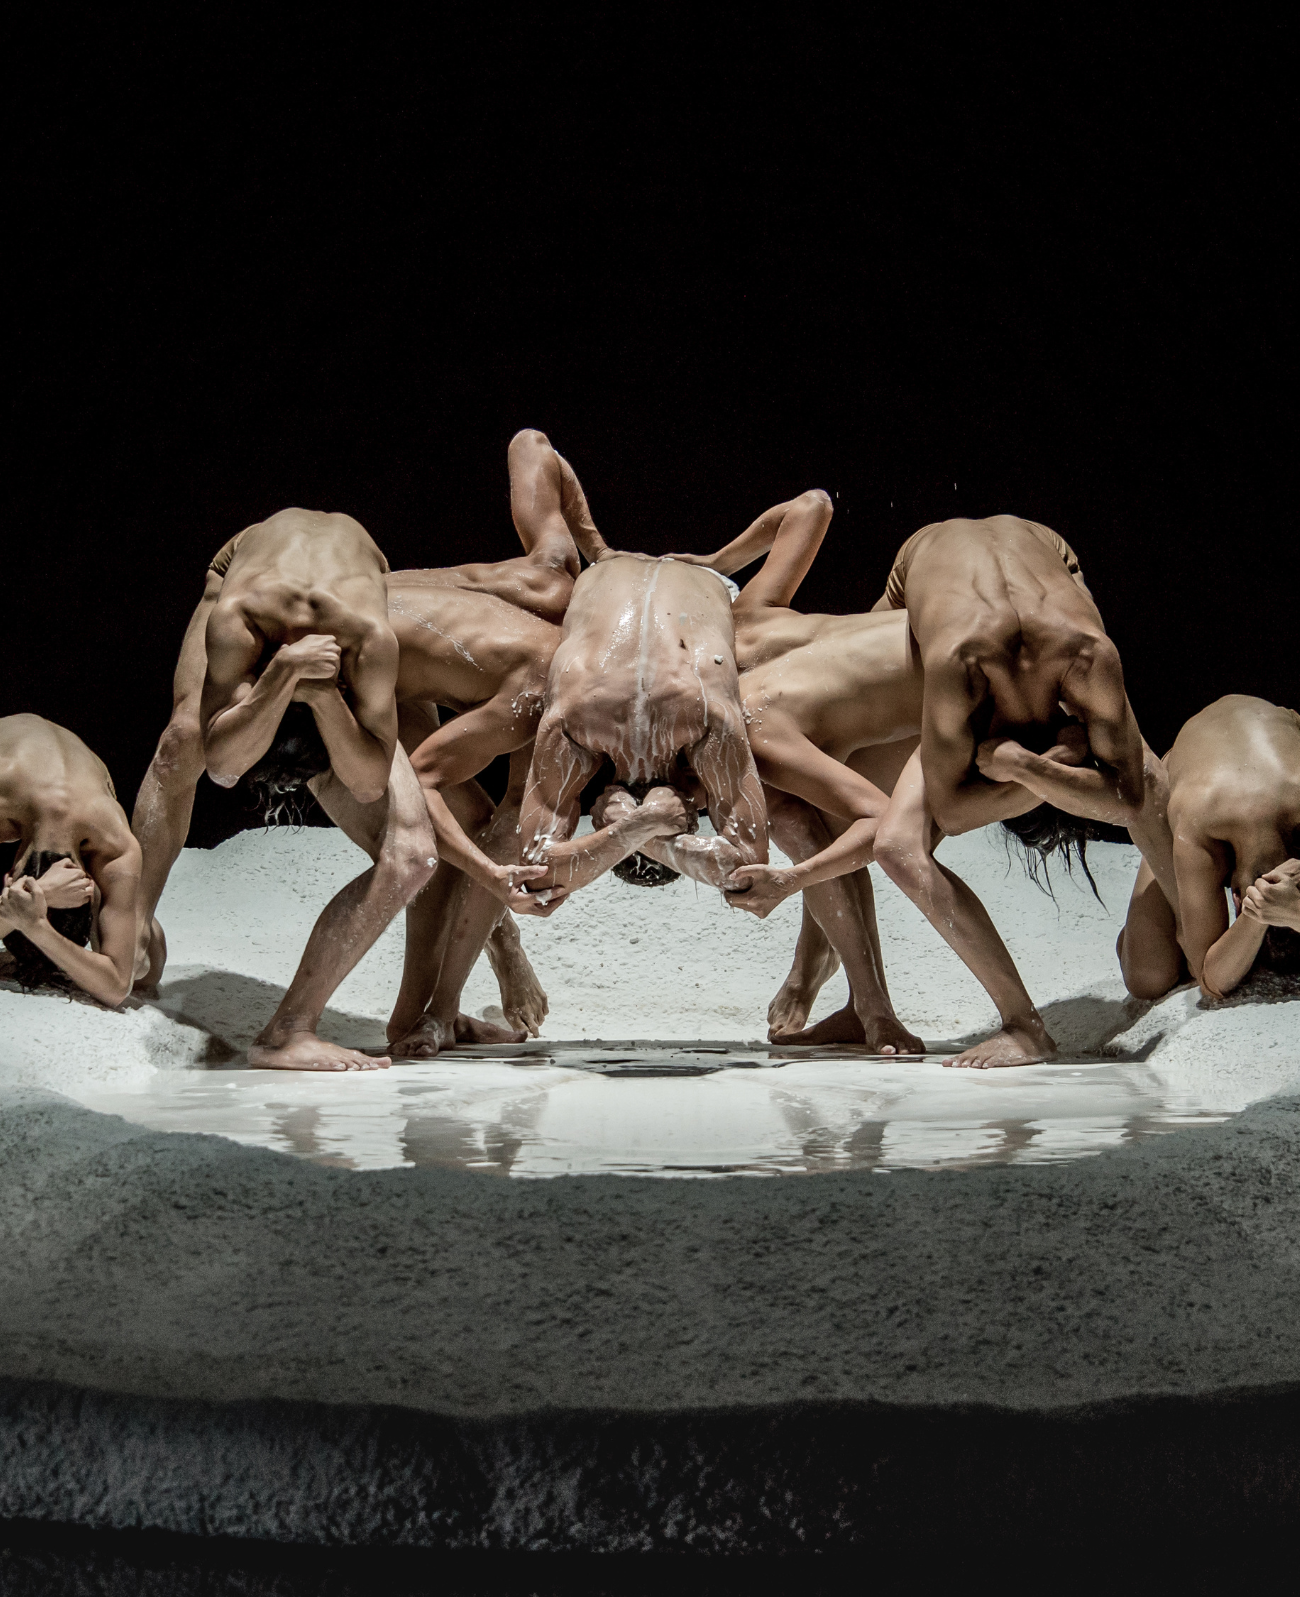 A group of dancers, naked from the waist up form an intricate geometric shape using their bodies